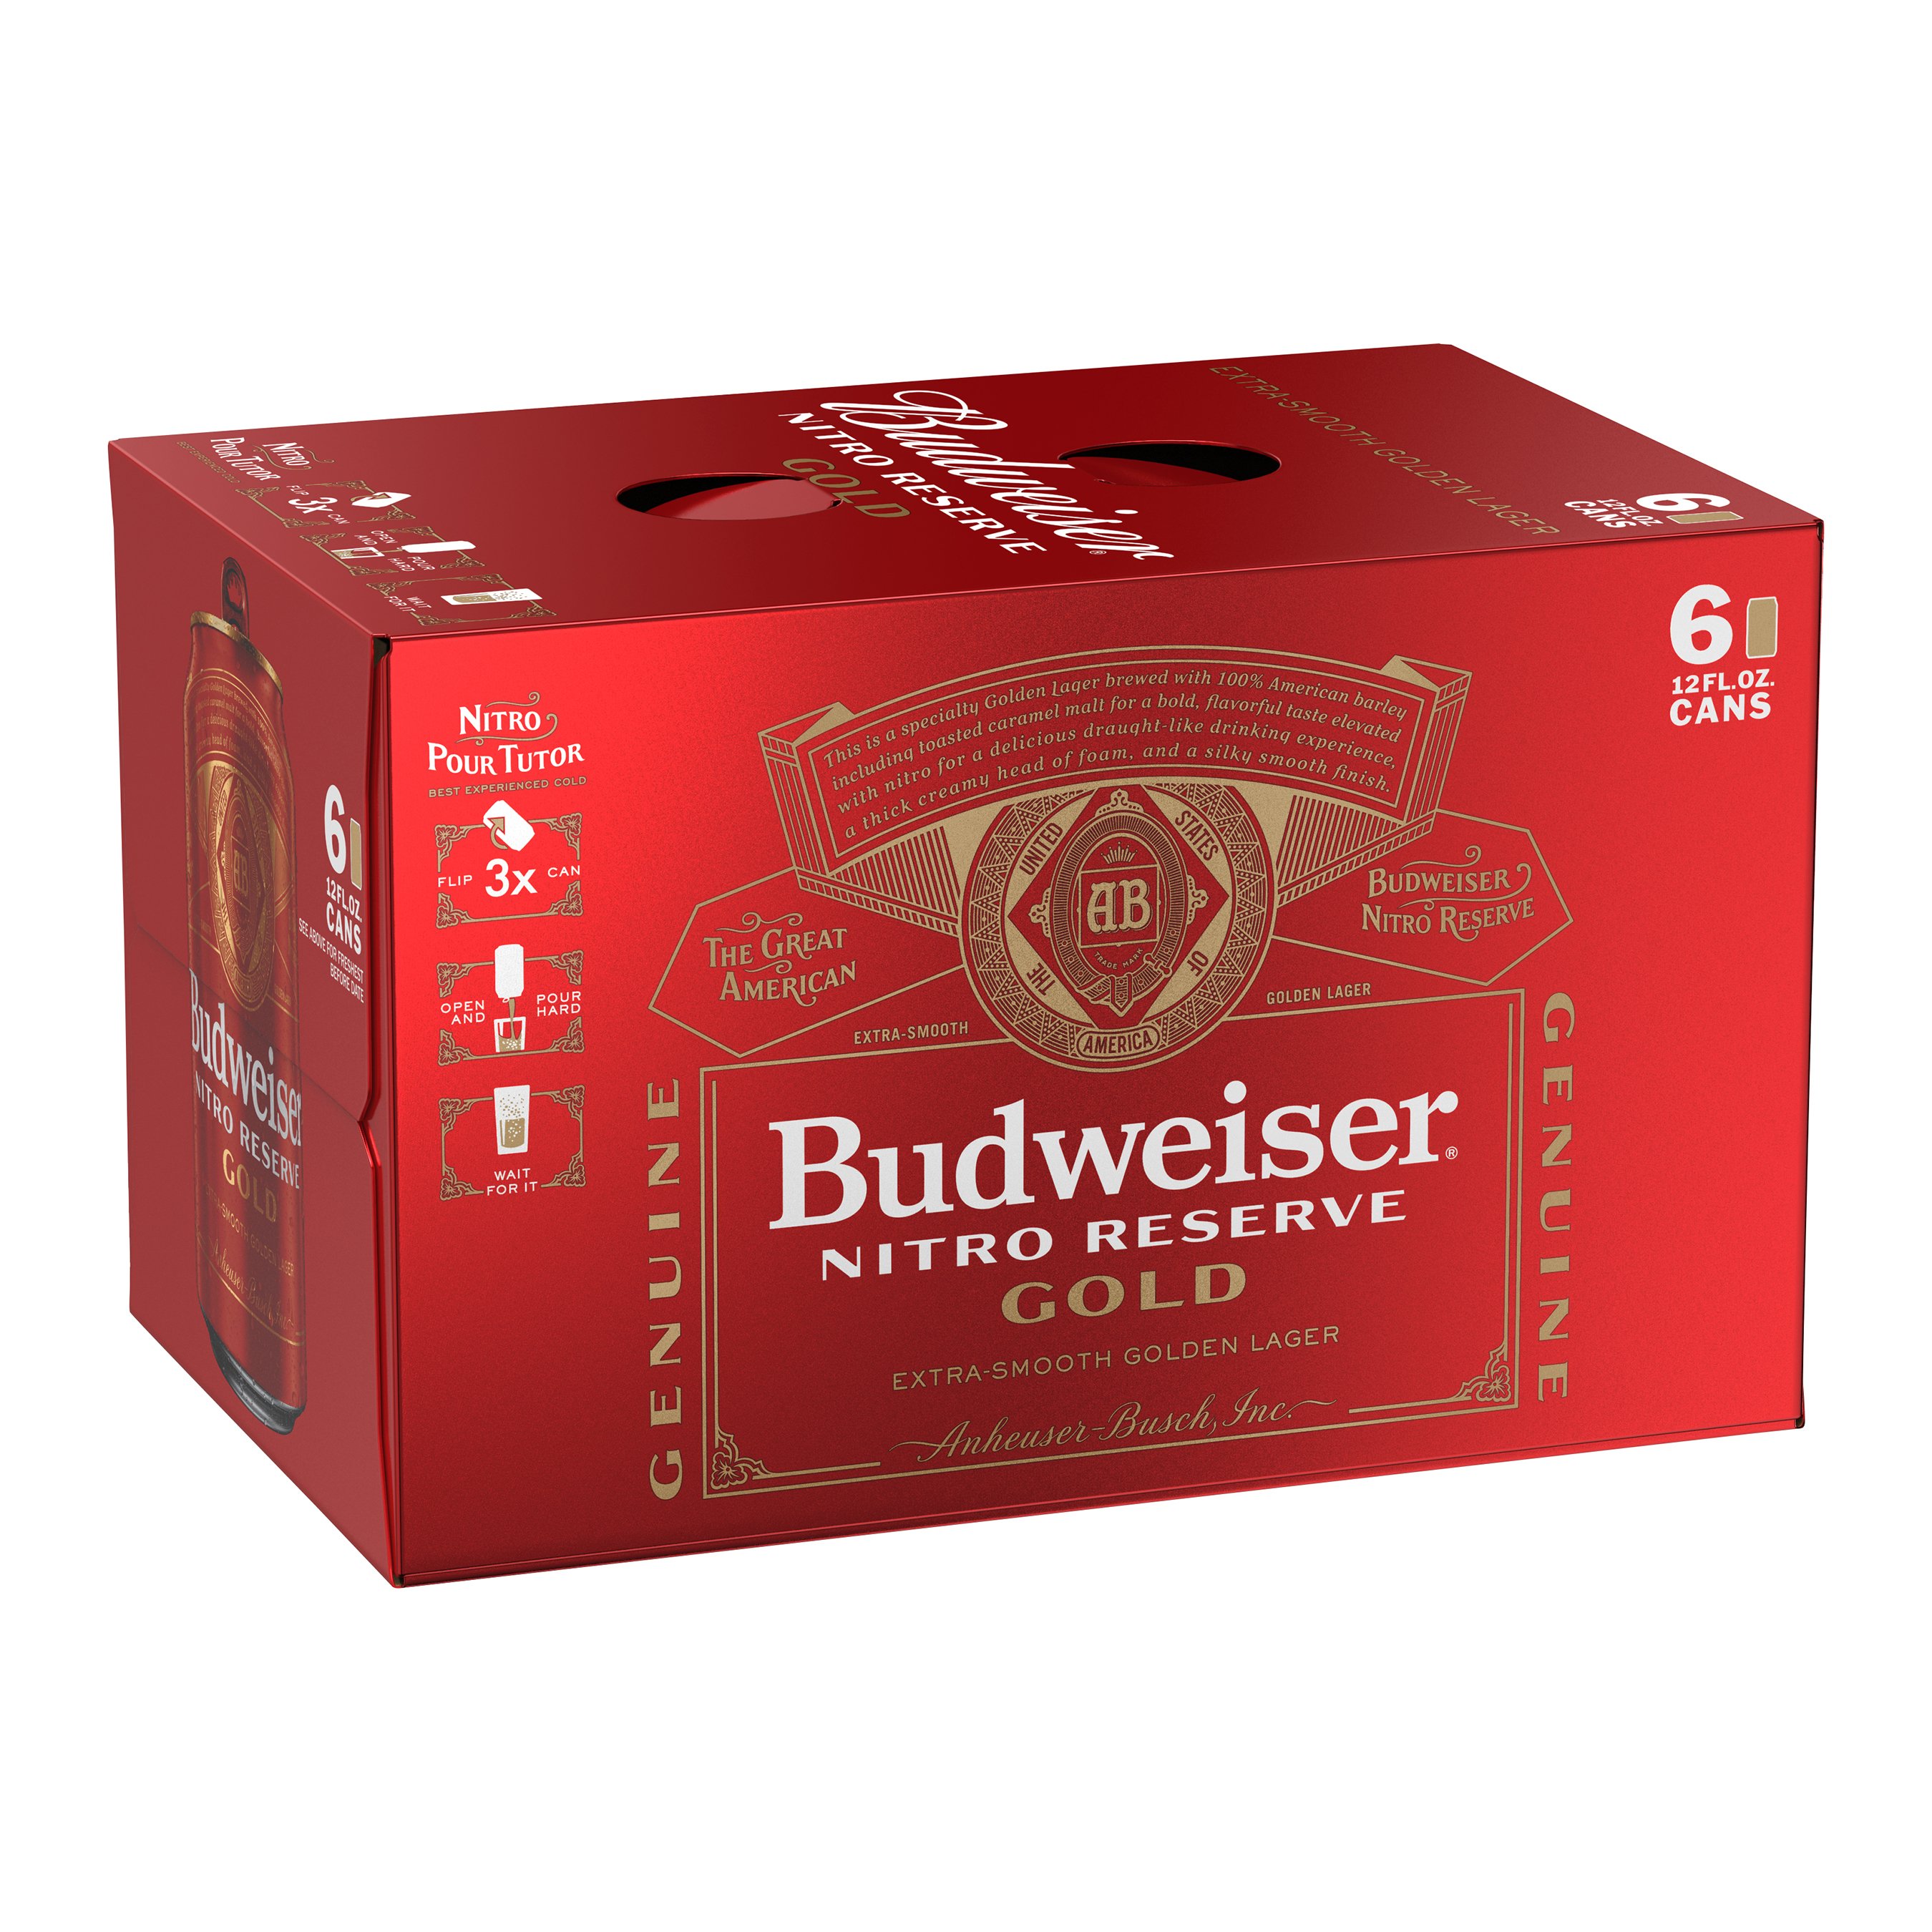 Bud Light Beer 6 pk Cans - Shop Beer at H-E-B